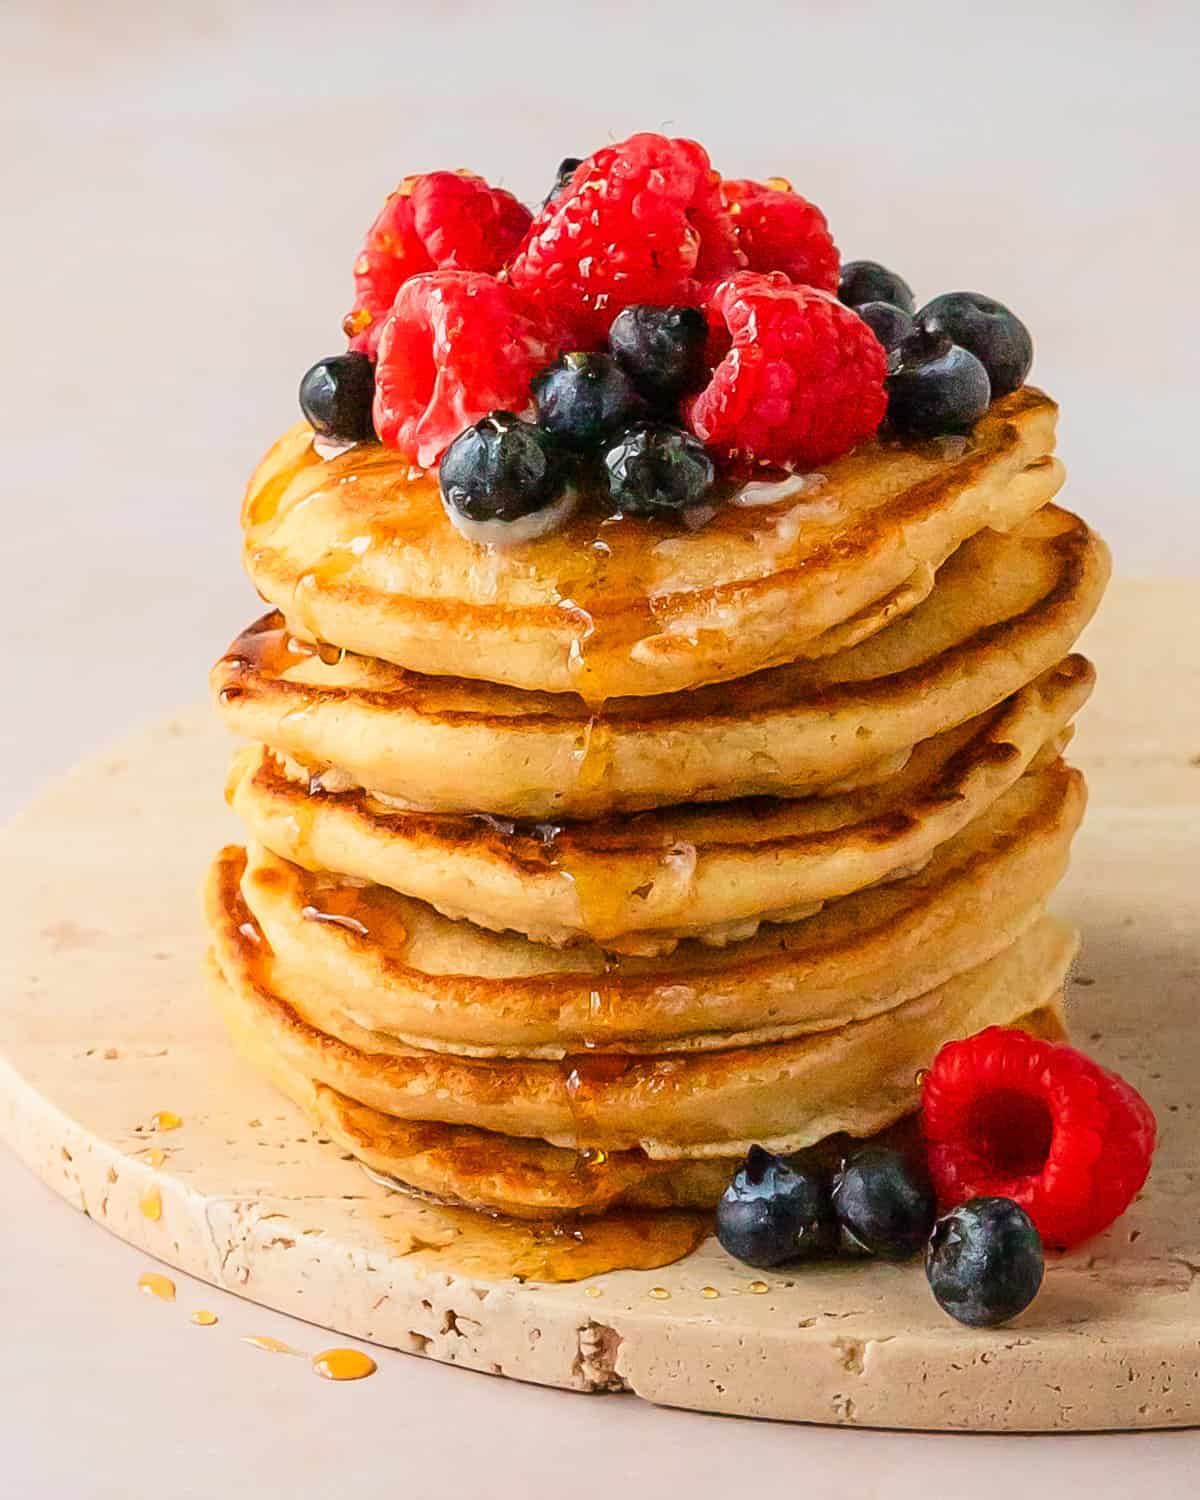 Pancakes without milk are are so light, fluffy and flavorful homemade pancakes made without milk. Learn how to make these quick and easy no milk pancakes using simple pantry ingredients and water as a substitute for milk. A stack of these from scratch pancakes makes the perfect cozy breakfast everyone will love, even if you don’t have milk. 